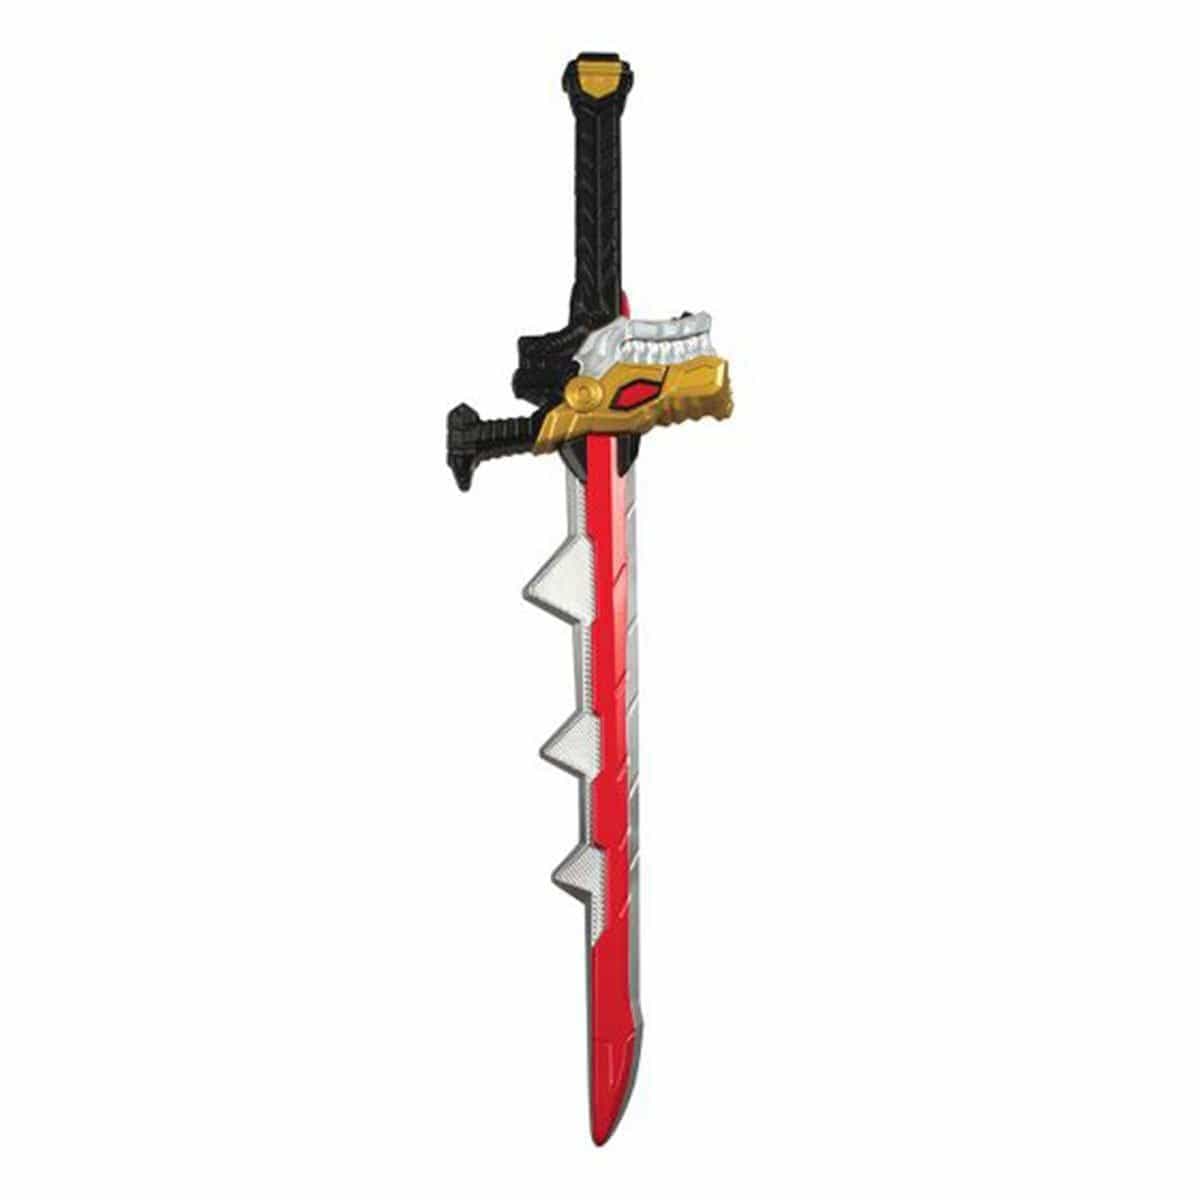 Buy Costume Accessories Ranger Sword, Power Rangers Dino sold at Party Expert